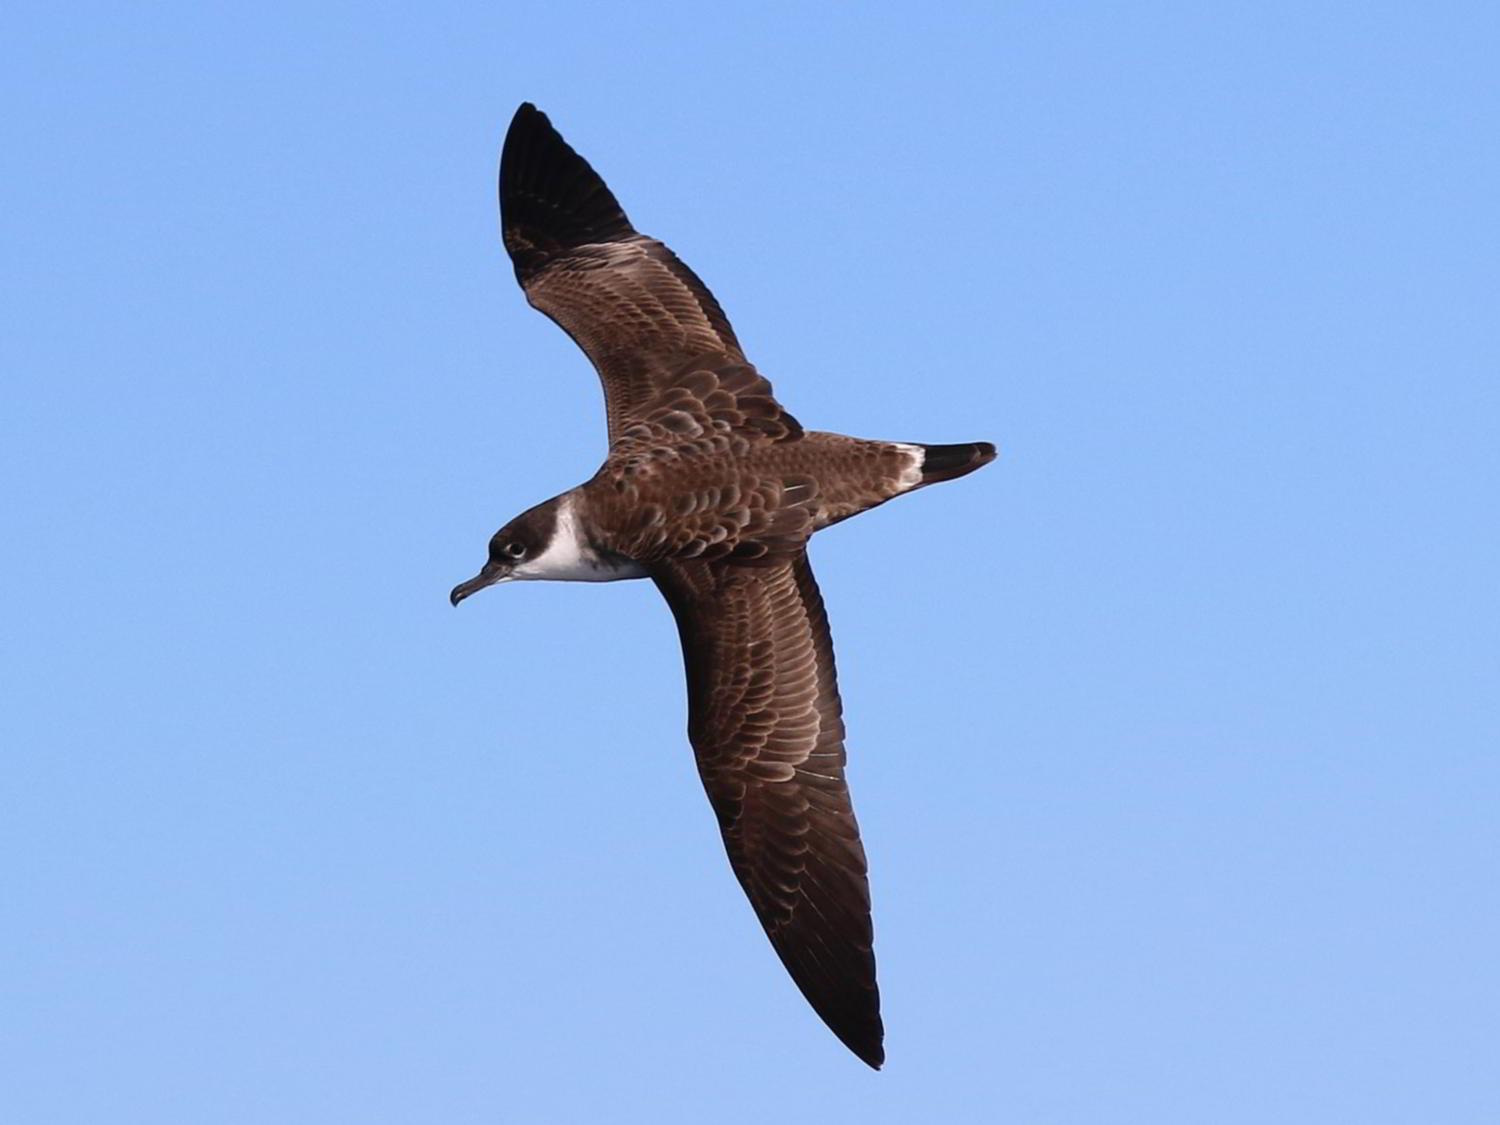 Great Shearwater flying through a blue sky, the Algarve